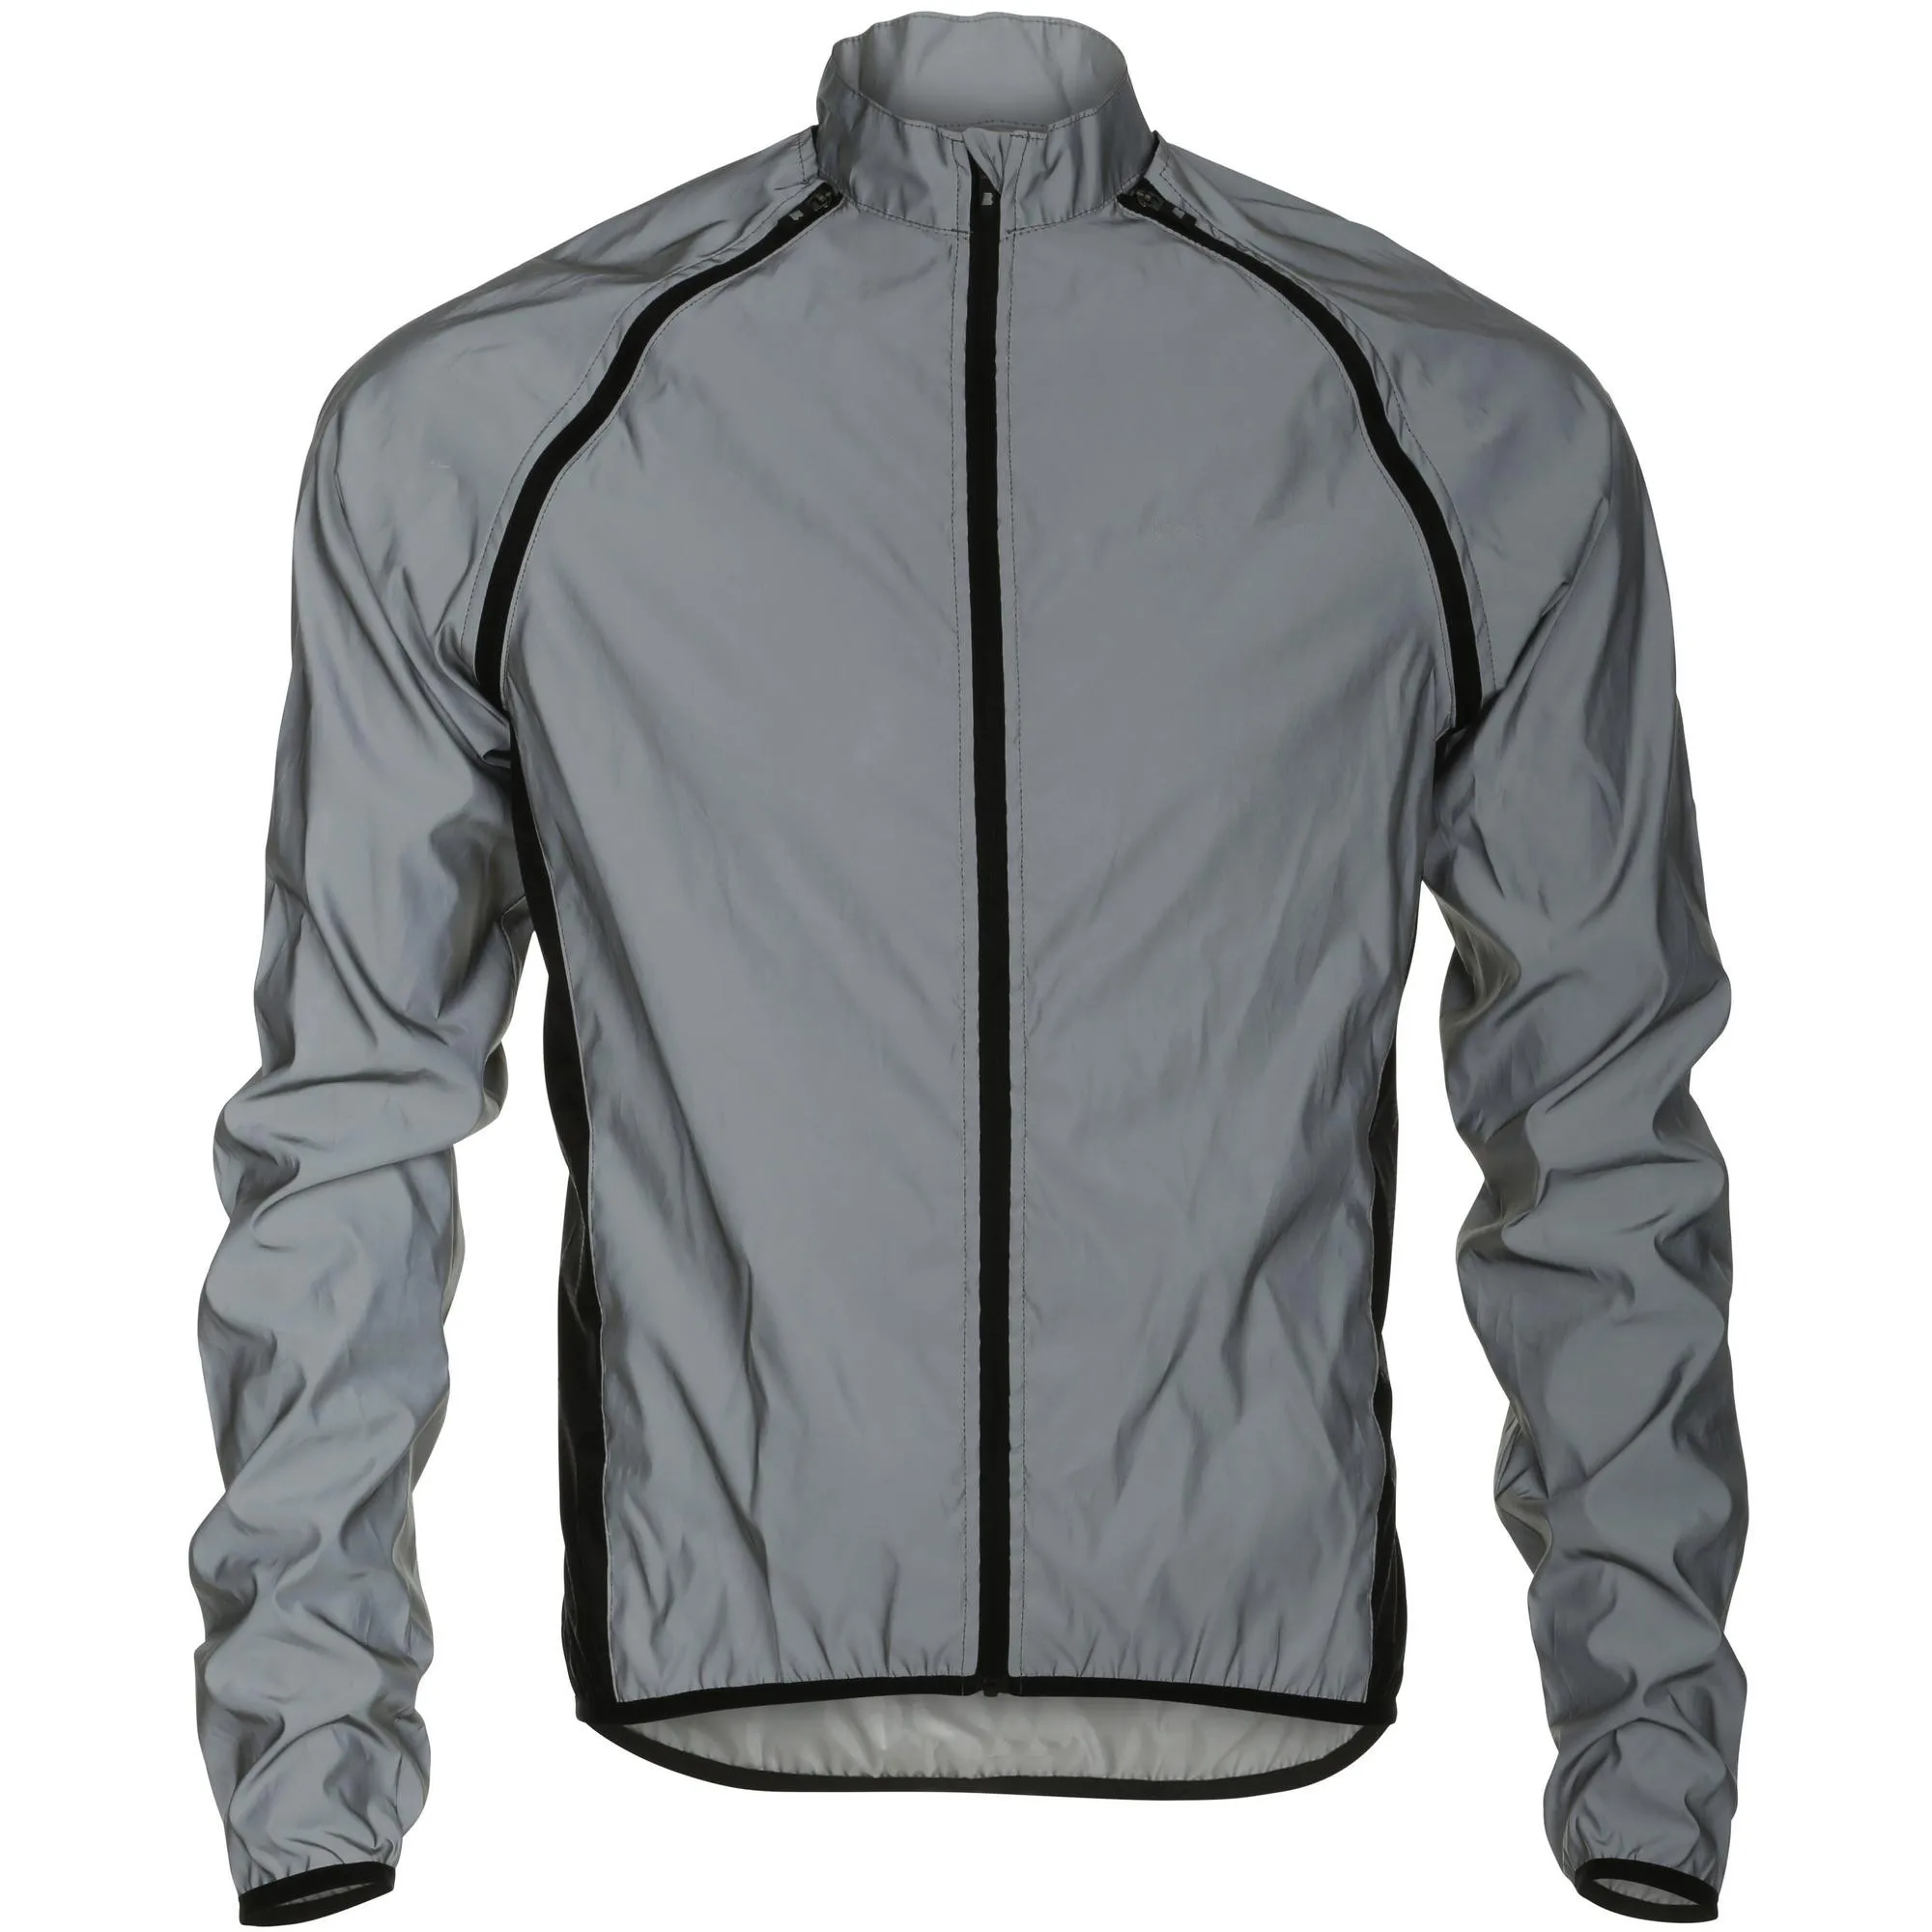 mens cycling jacket with removable sleeves